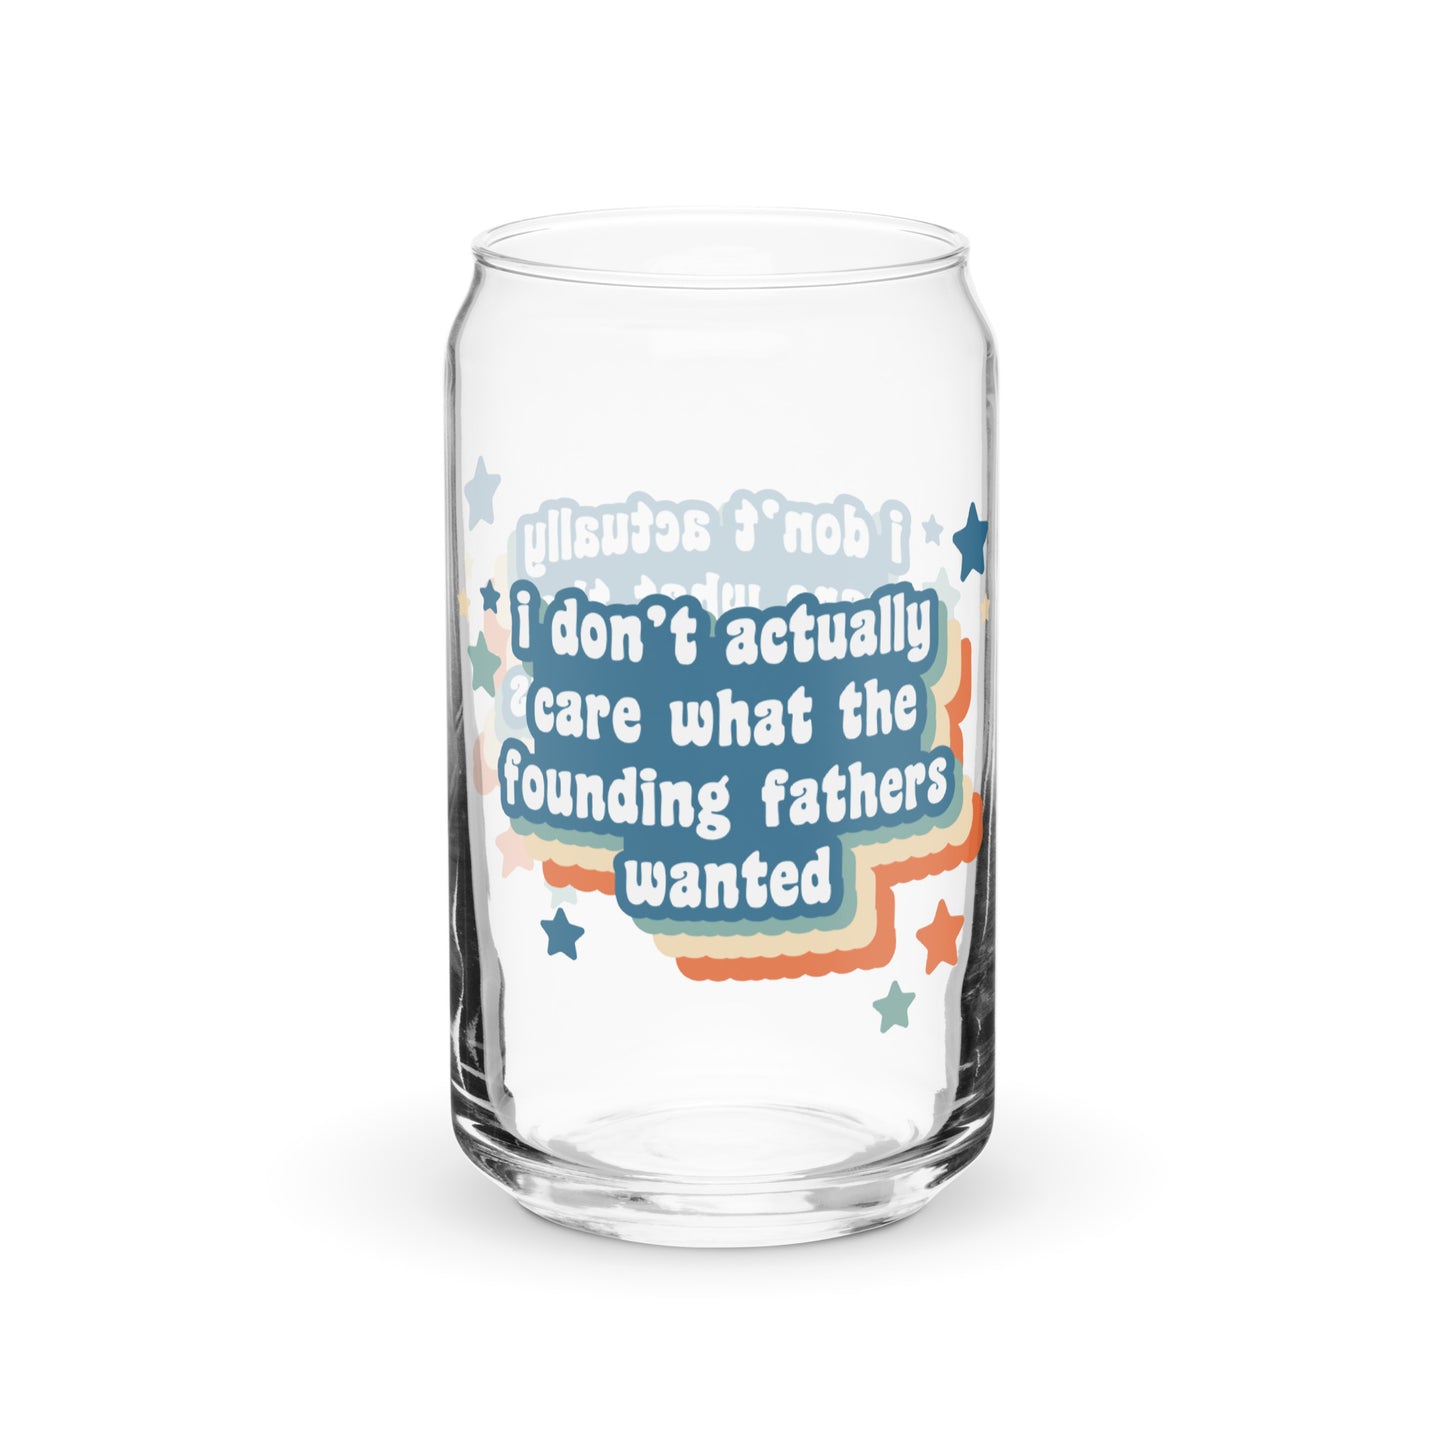 A can-shaped glass featuring colorful text surrounded by stars. The text reads "I don't actually care what the founding fathers wanted"